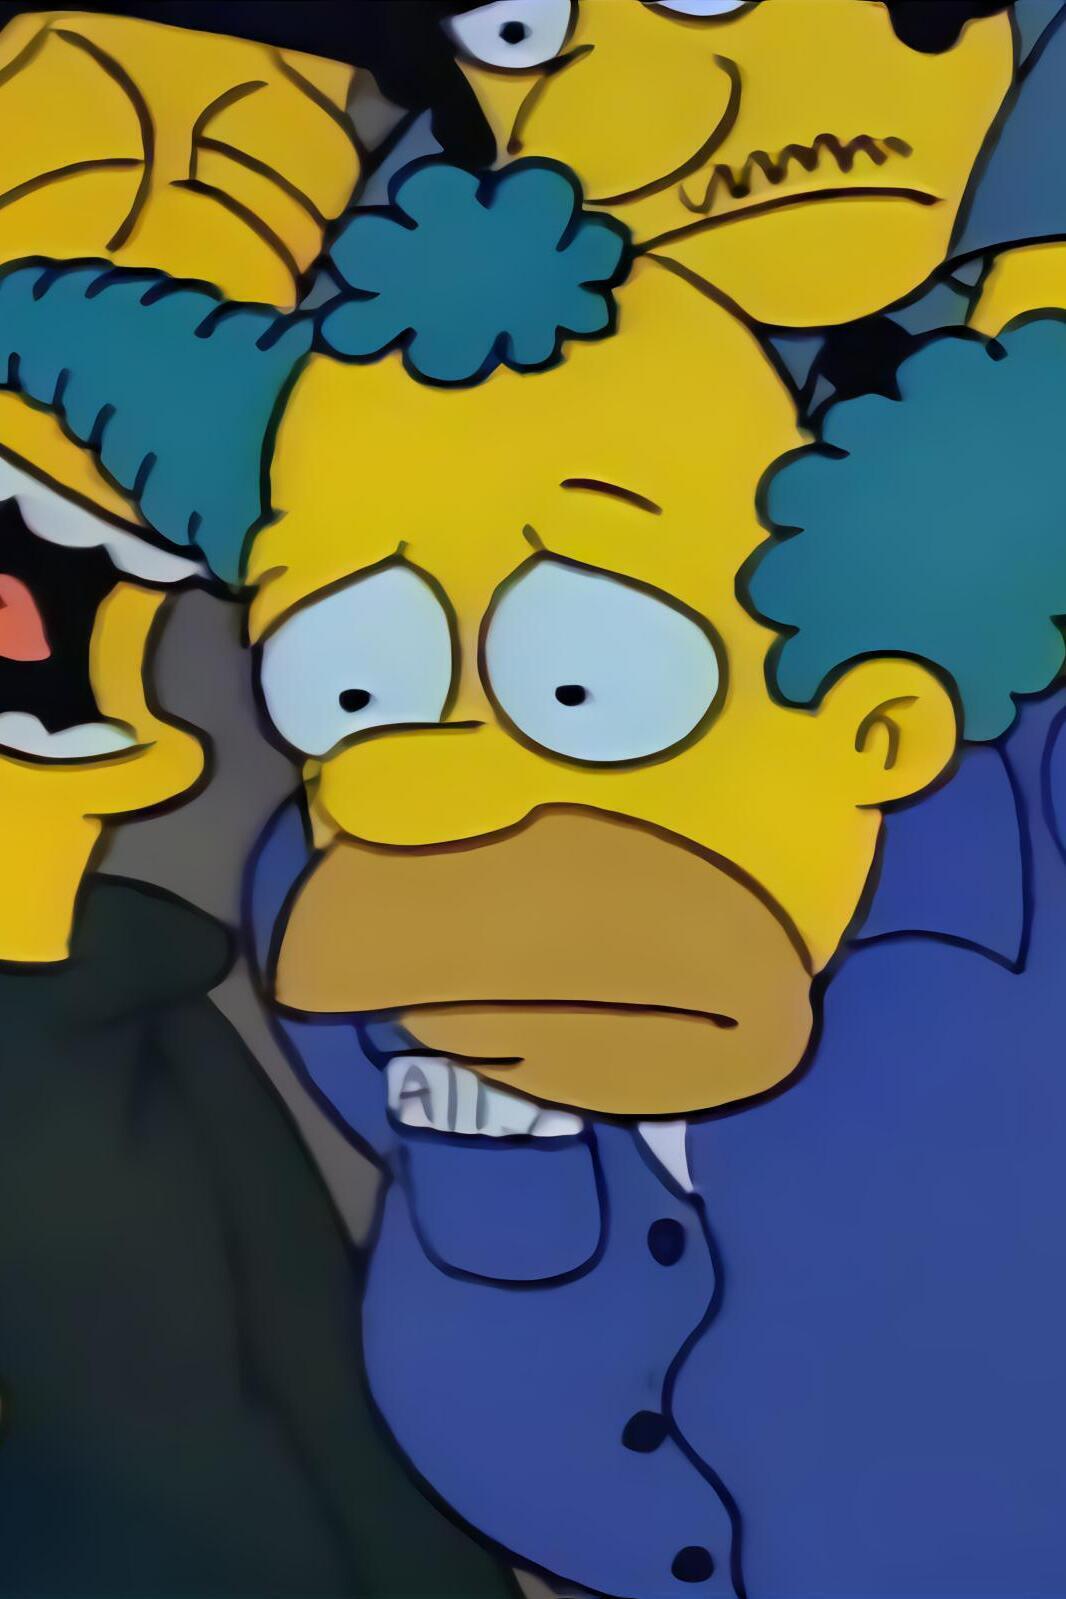 The Simpsons - Krusty Gets Busted